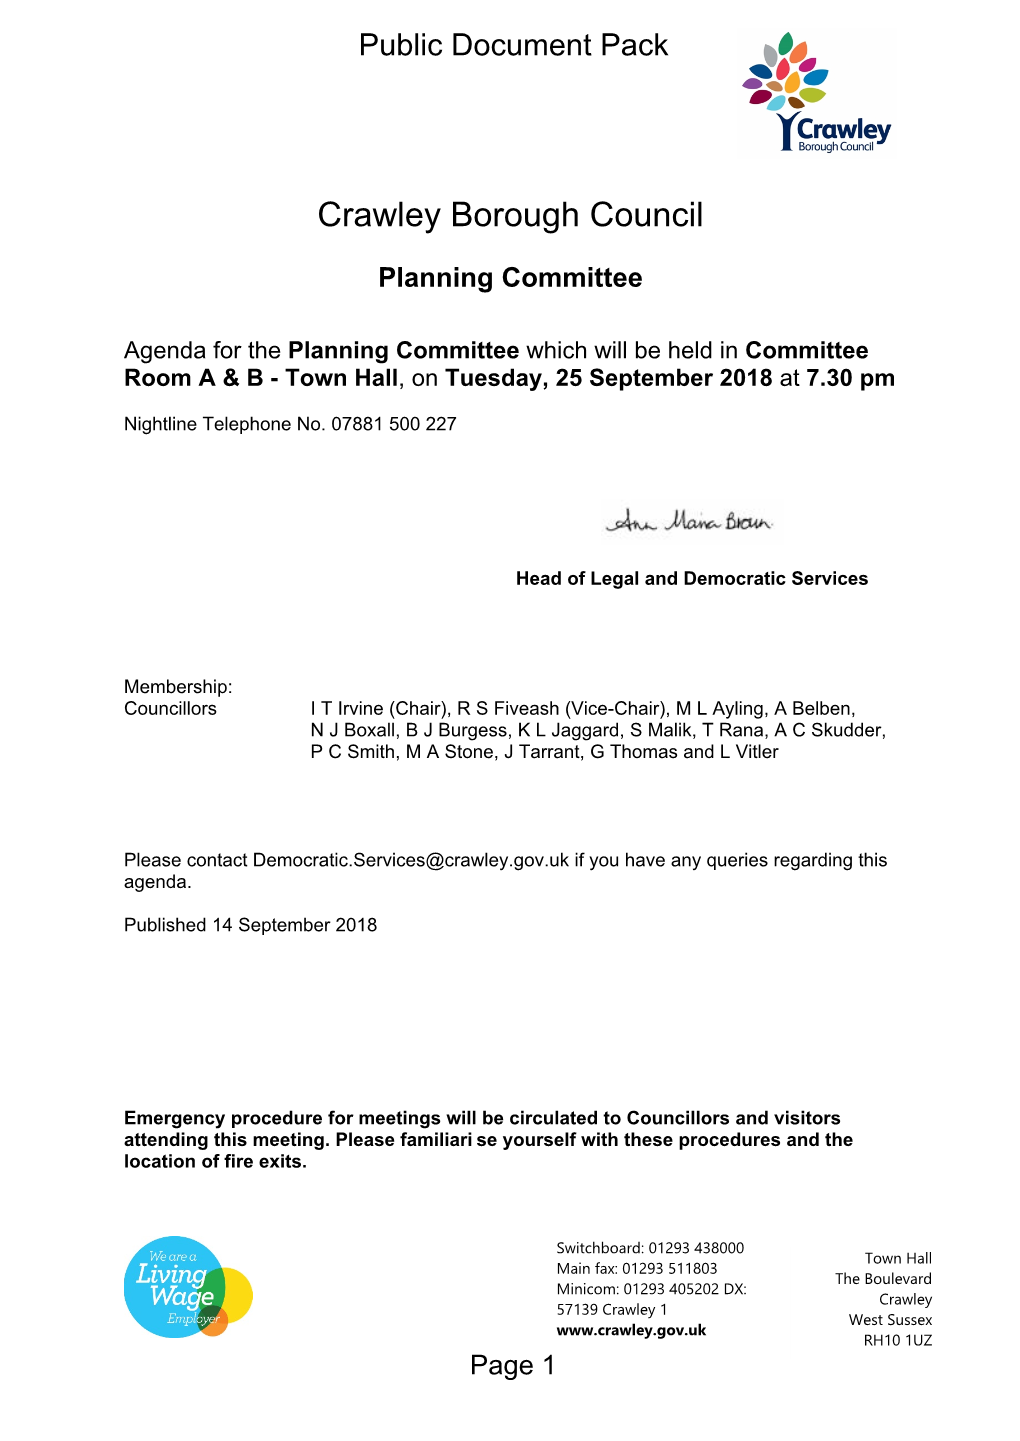 (Public Pack)Agenda Document for Planning Committee, 25/09/2018